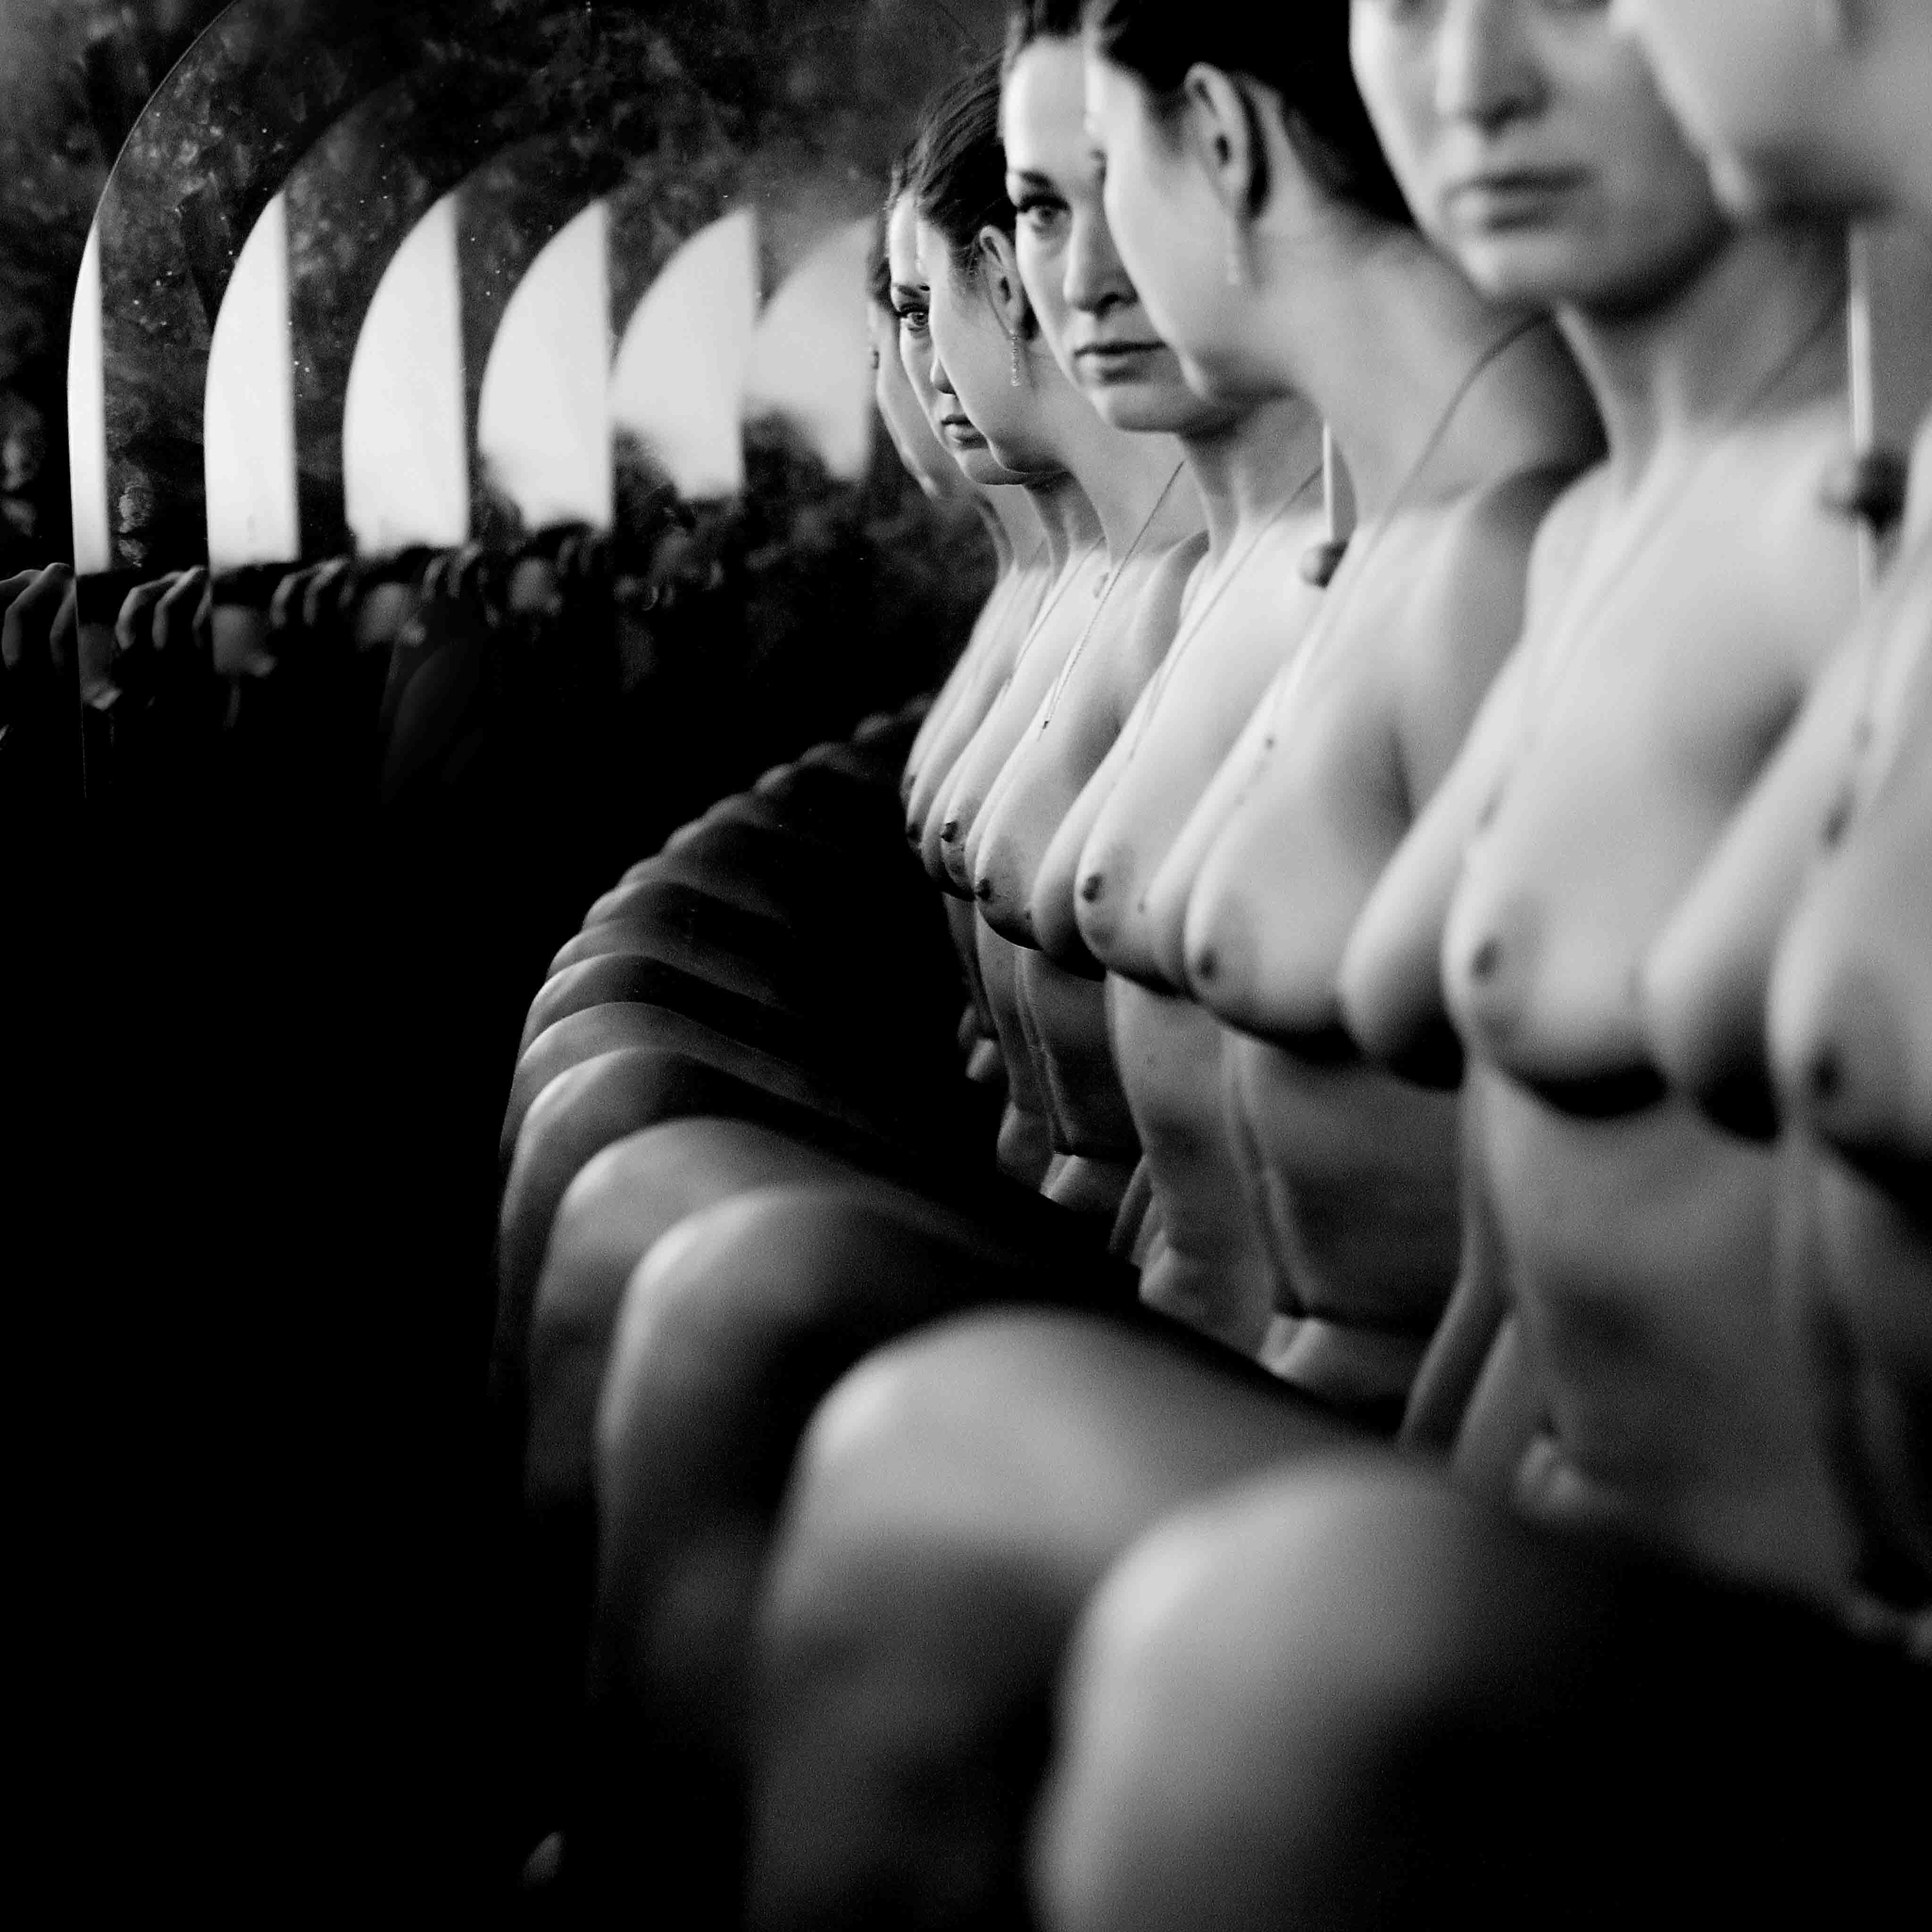 "Mirrors" Photography 39" x 39" inch Edition 1/3 by Olha Stepanian